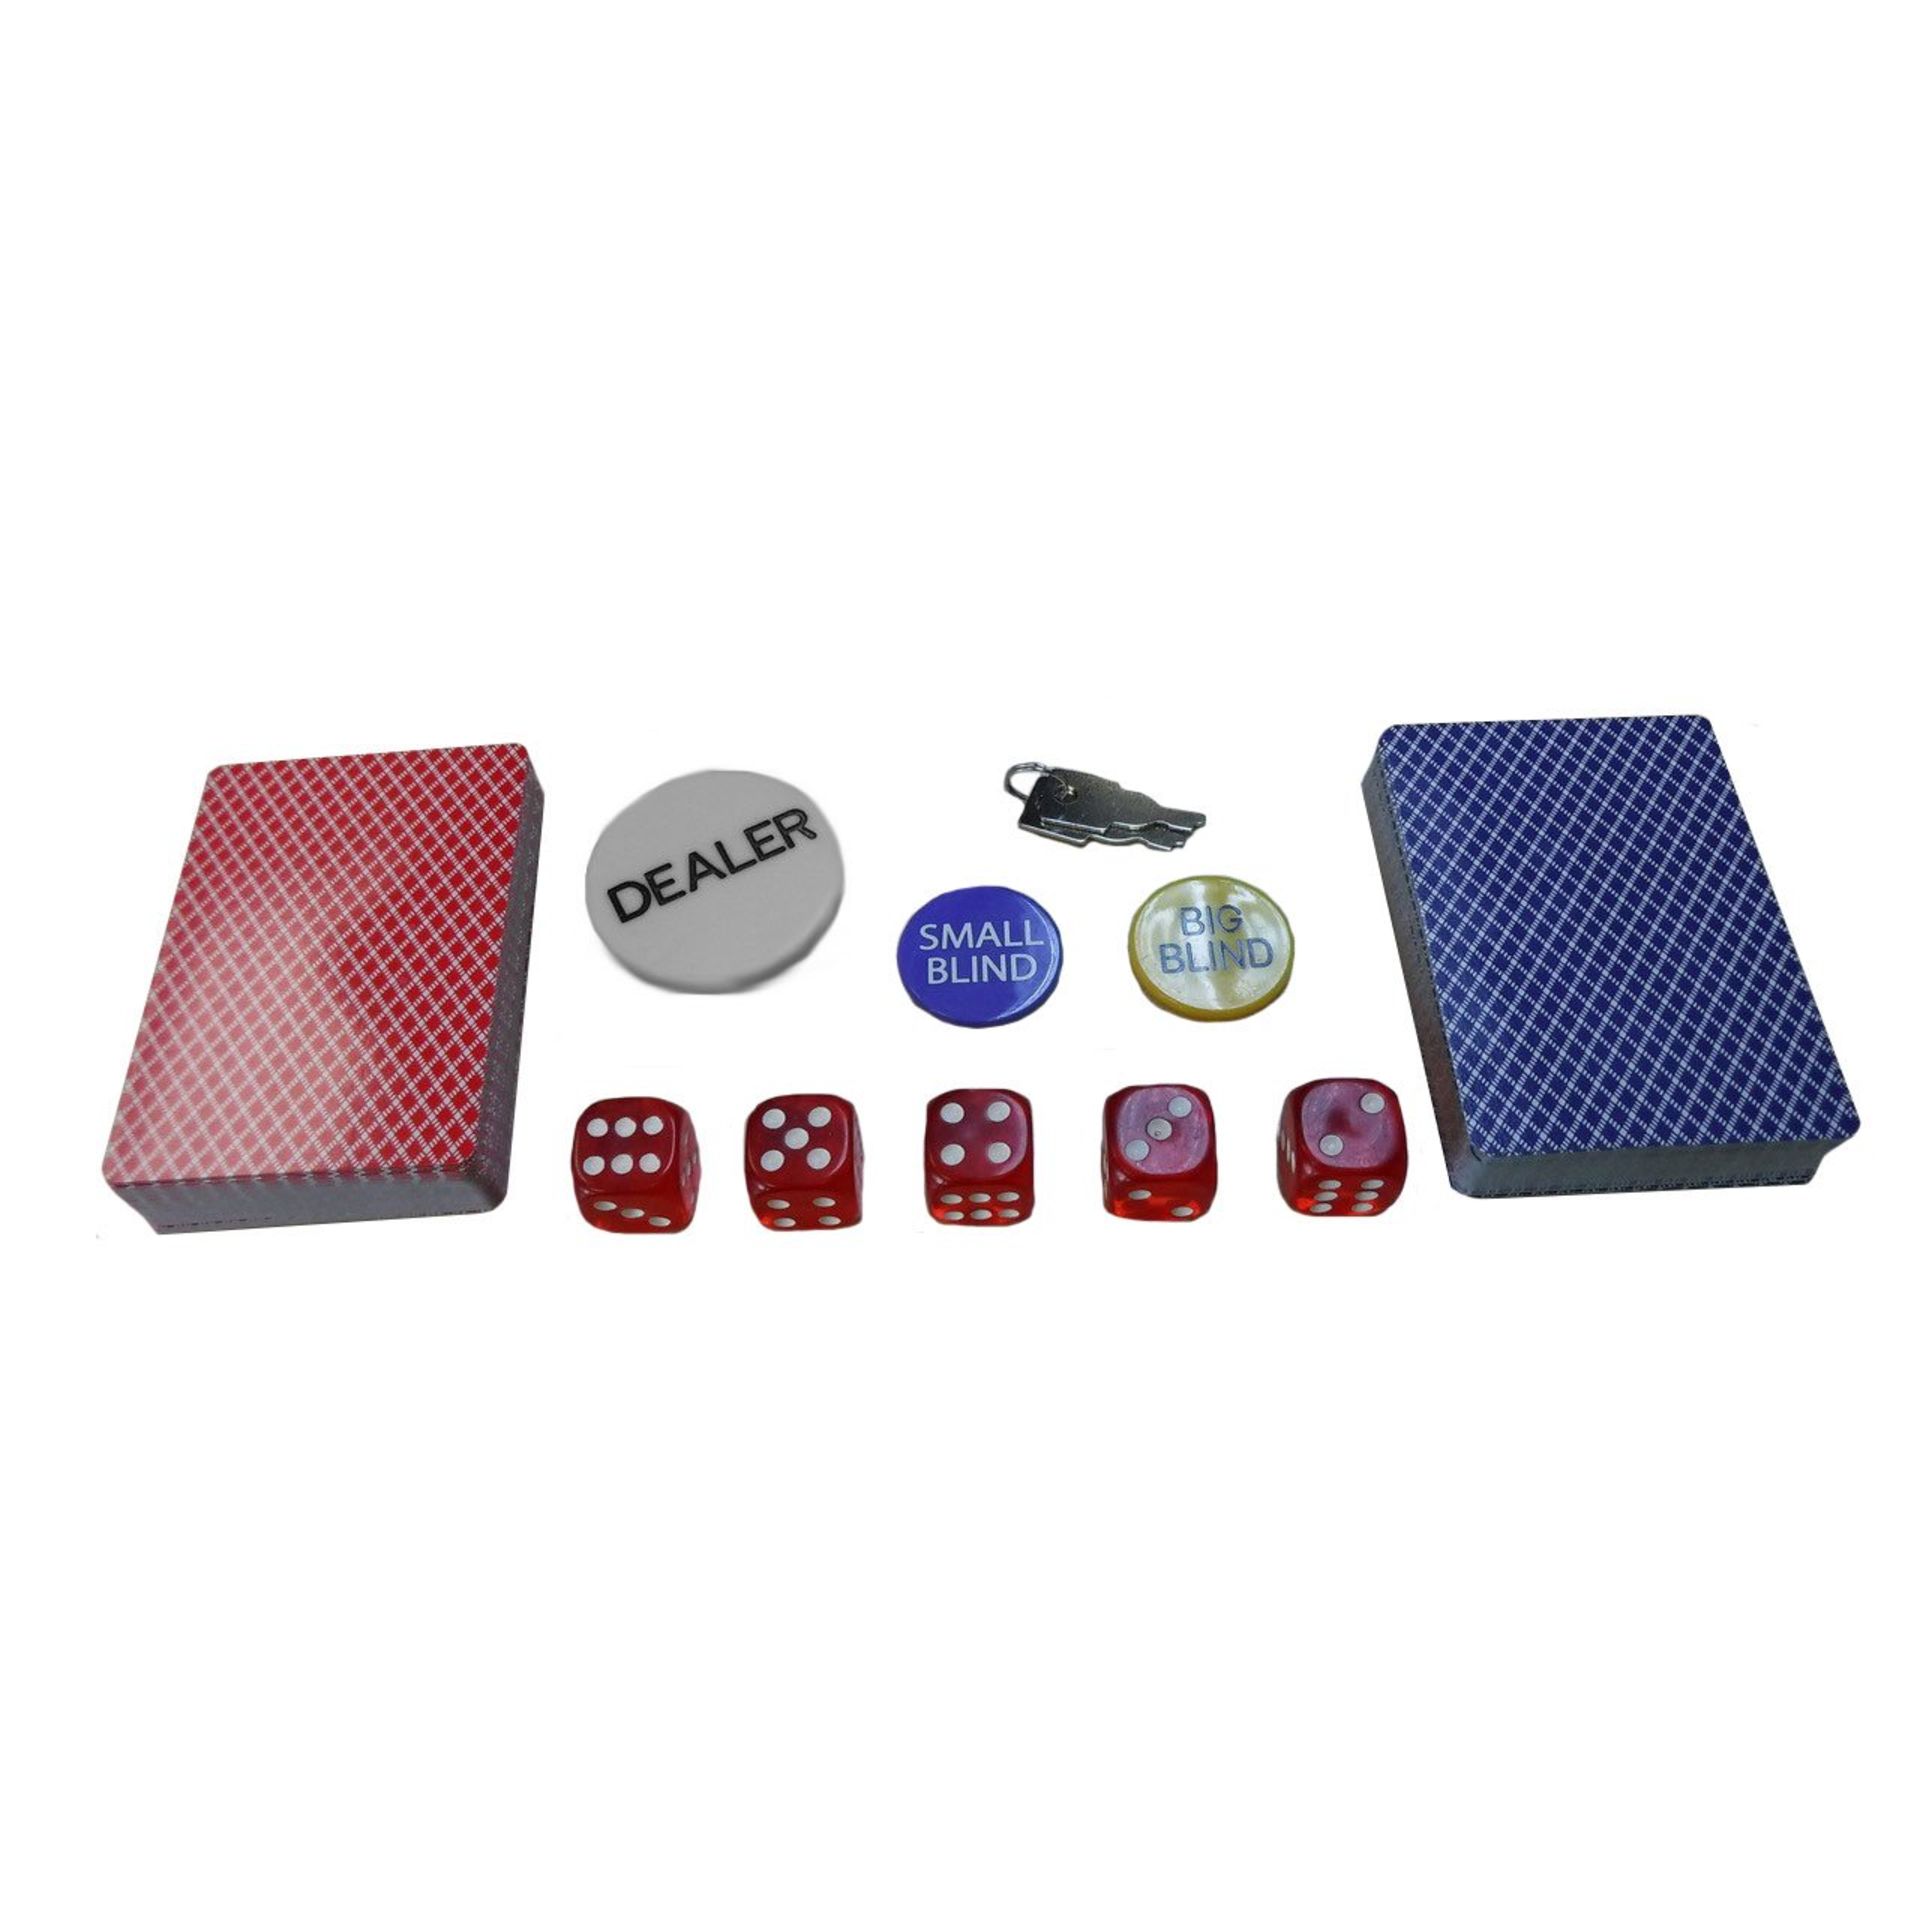 (G28) Poker Set - 500 Piece Complete With Casino Style Case Deluxe Portable Aluminium Carry ... - Image 3 of 3